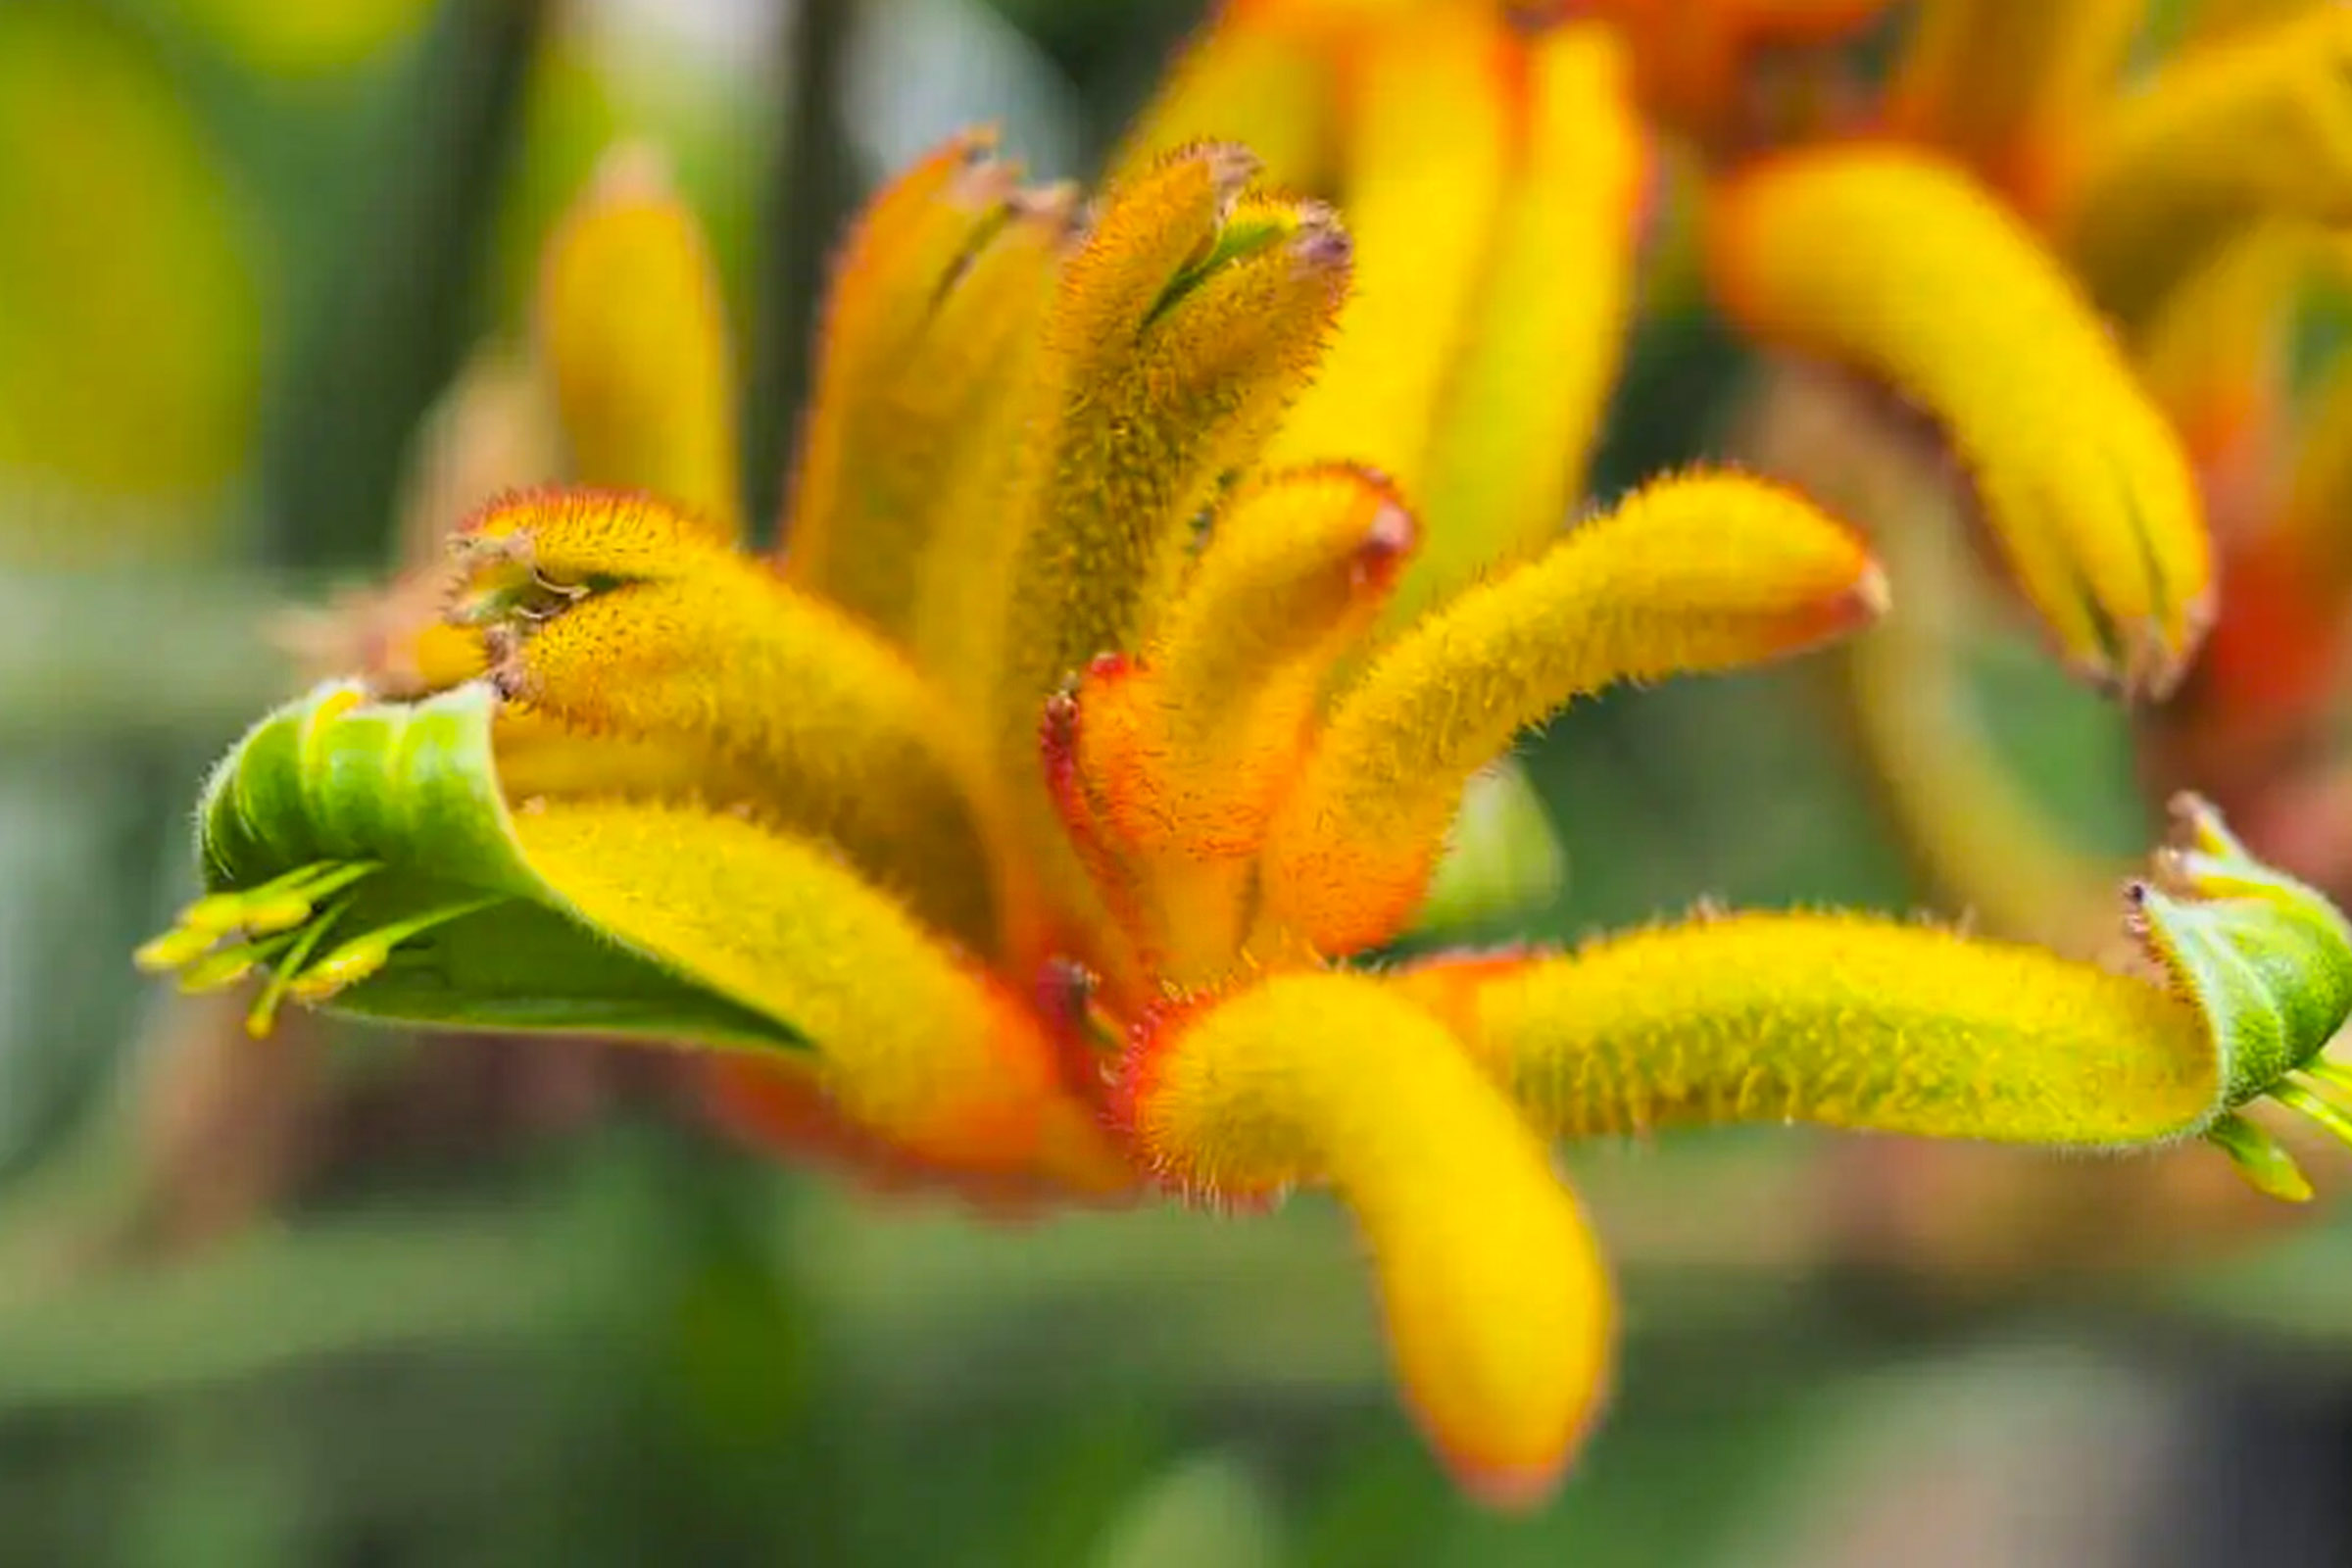 heres-anigozanthos-skippy-the-colorful-kangaroo-paw-series-from-africalla-featured